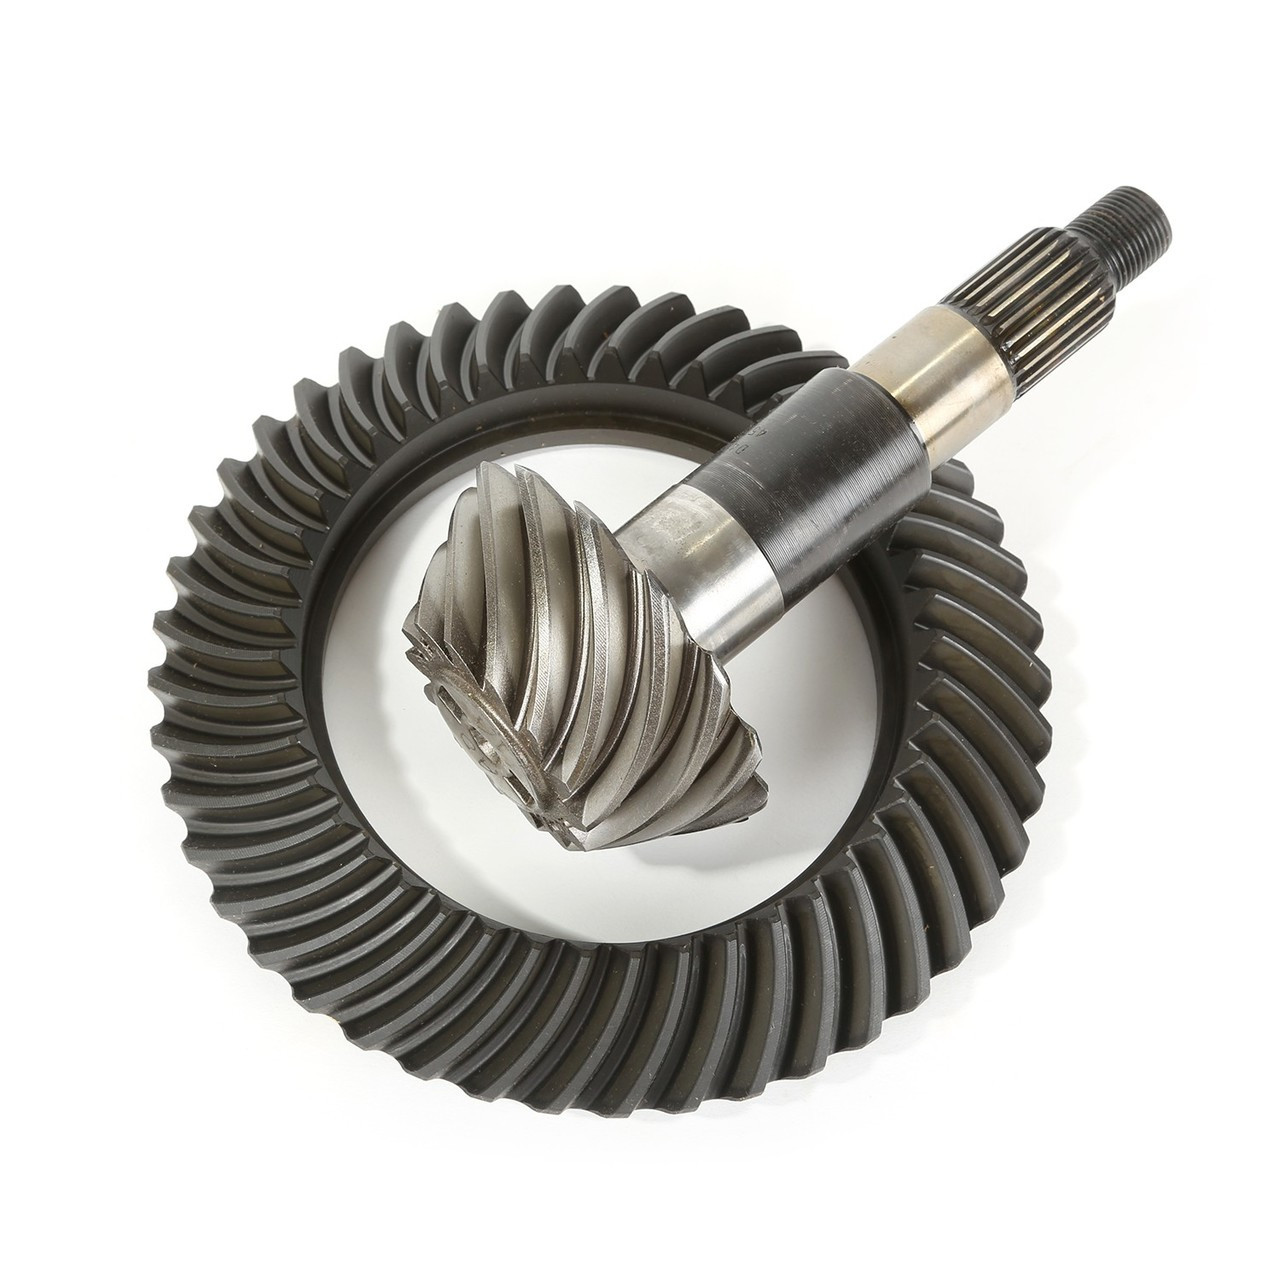 Buy Ring and Pinion,  Ratio, Rear; 07-18 Jeep Wrangler JK, for Dana 44  | Omix-ADA  Omix-ADA at JeepHut Off-Road